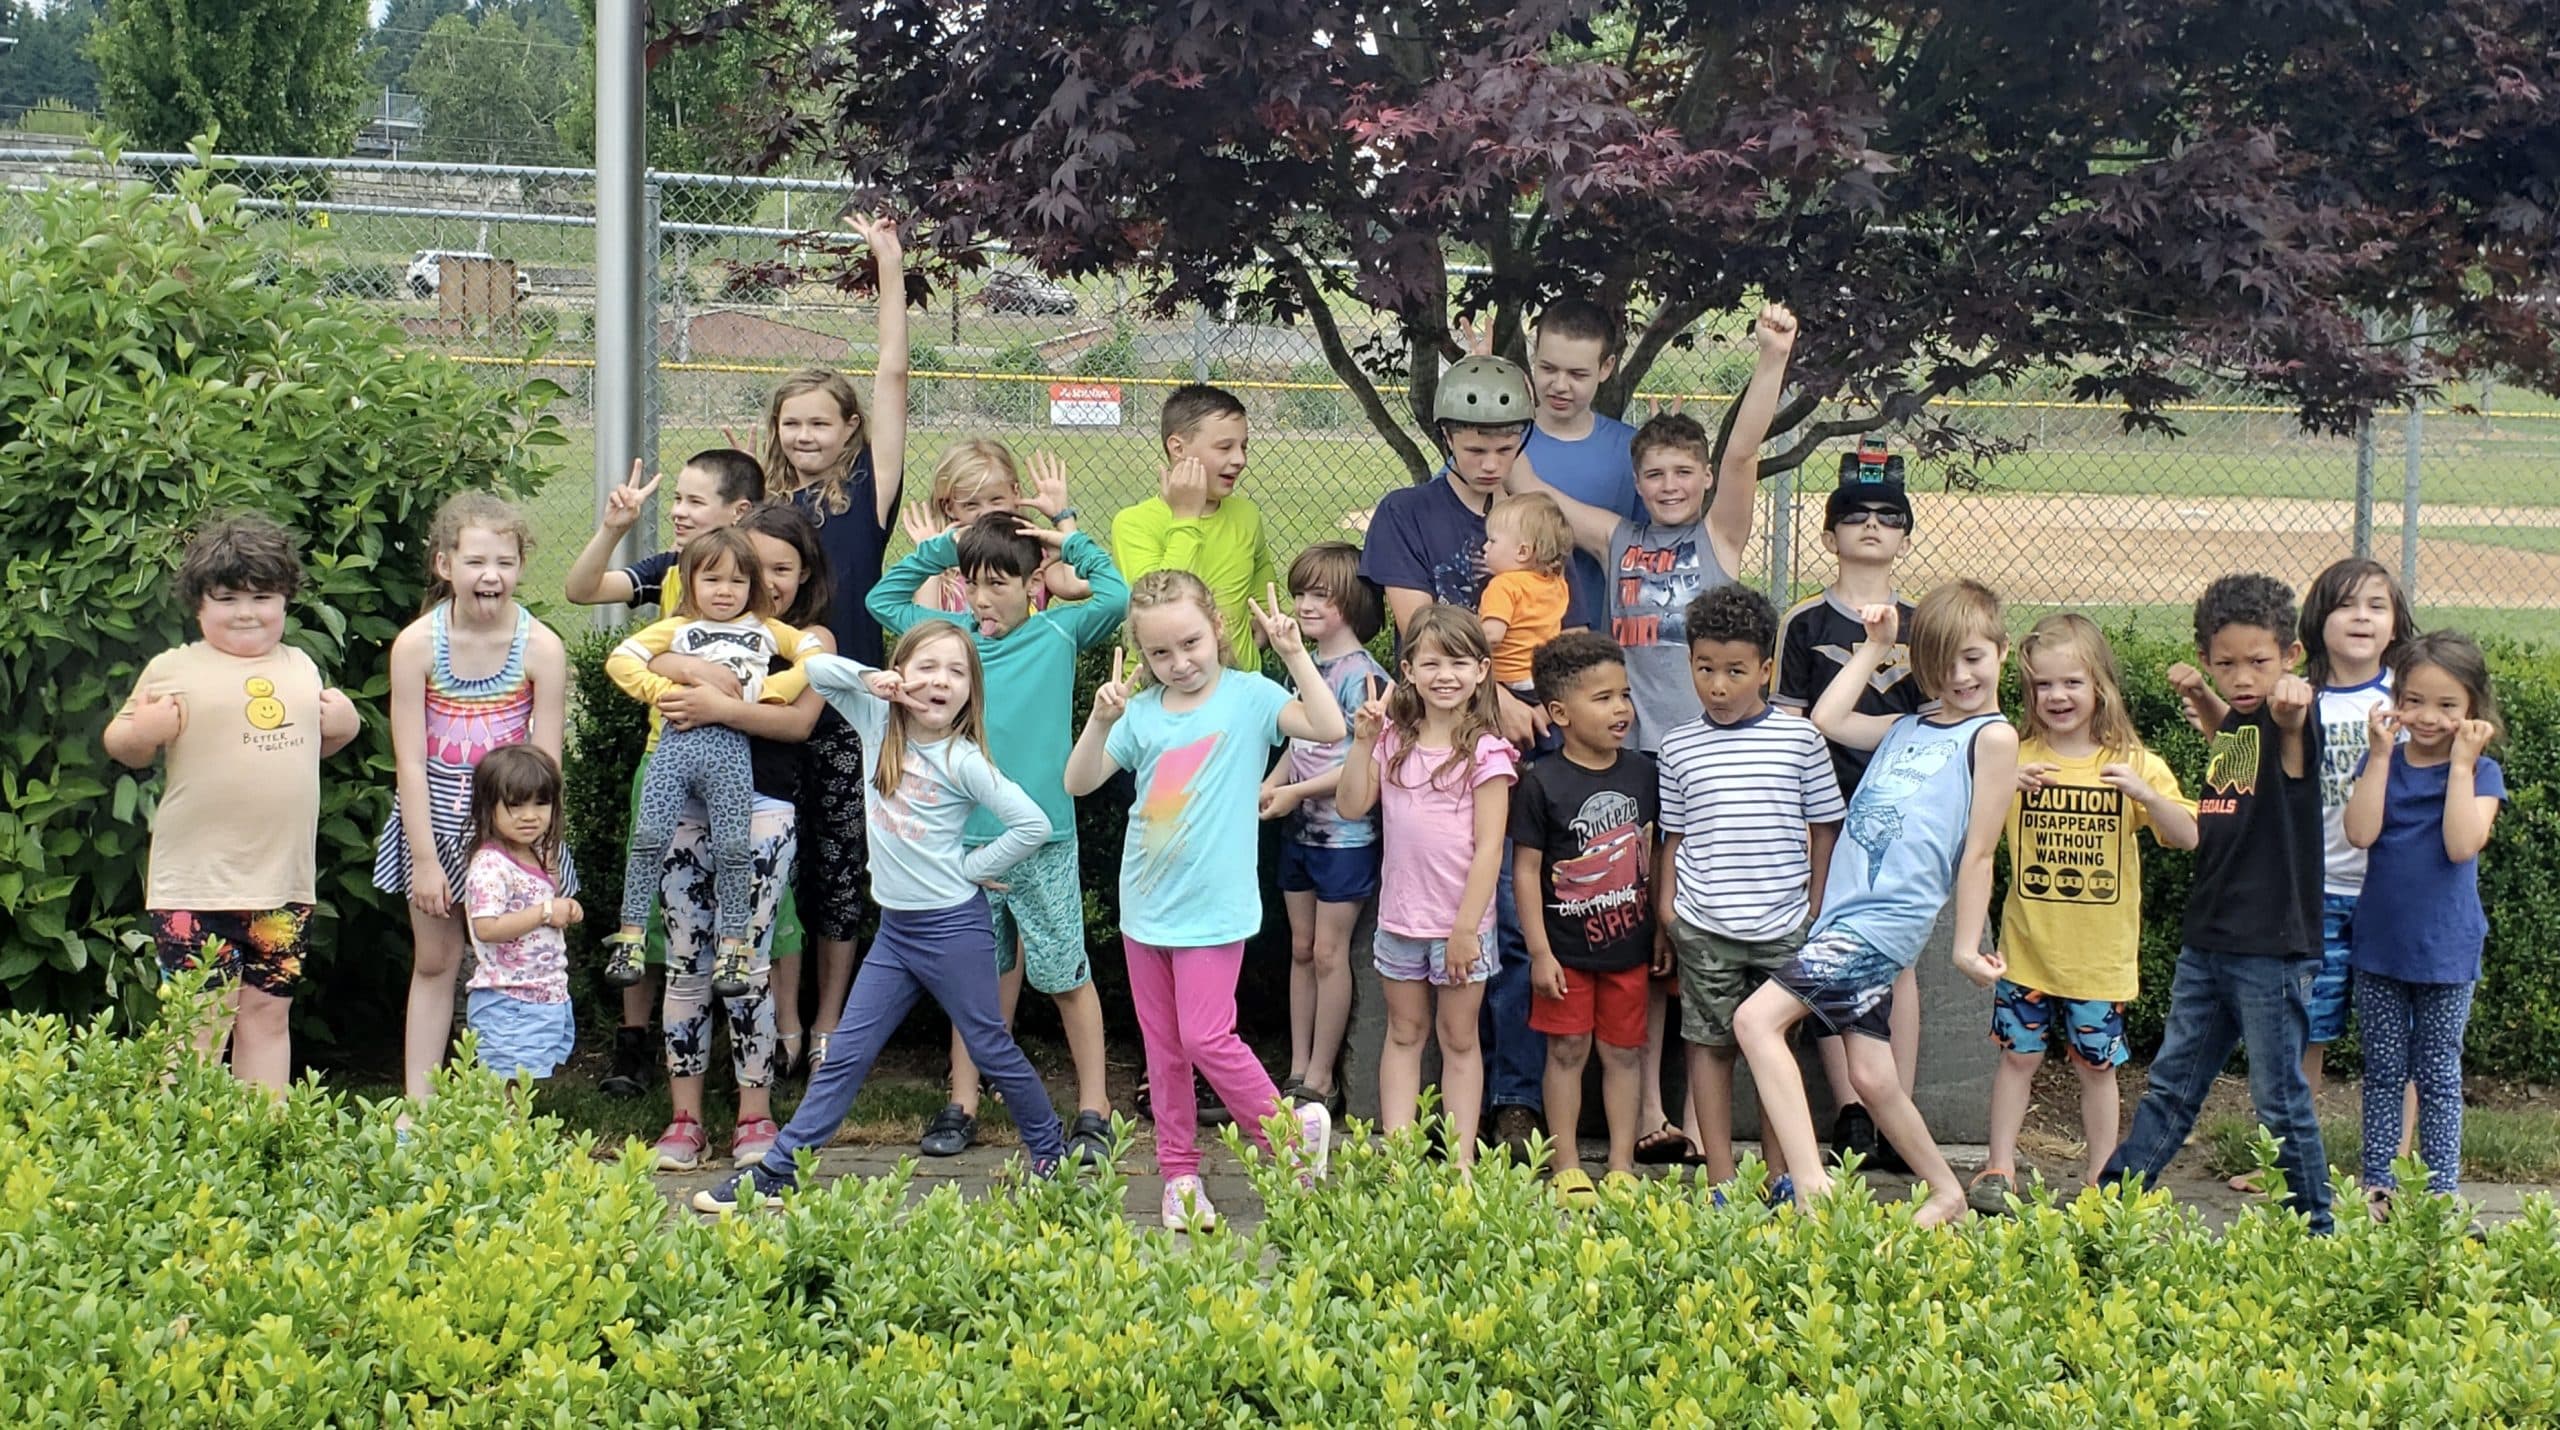 A large group of kids poses at a park